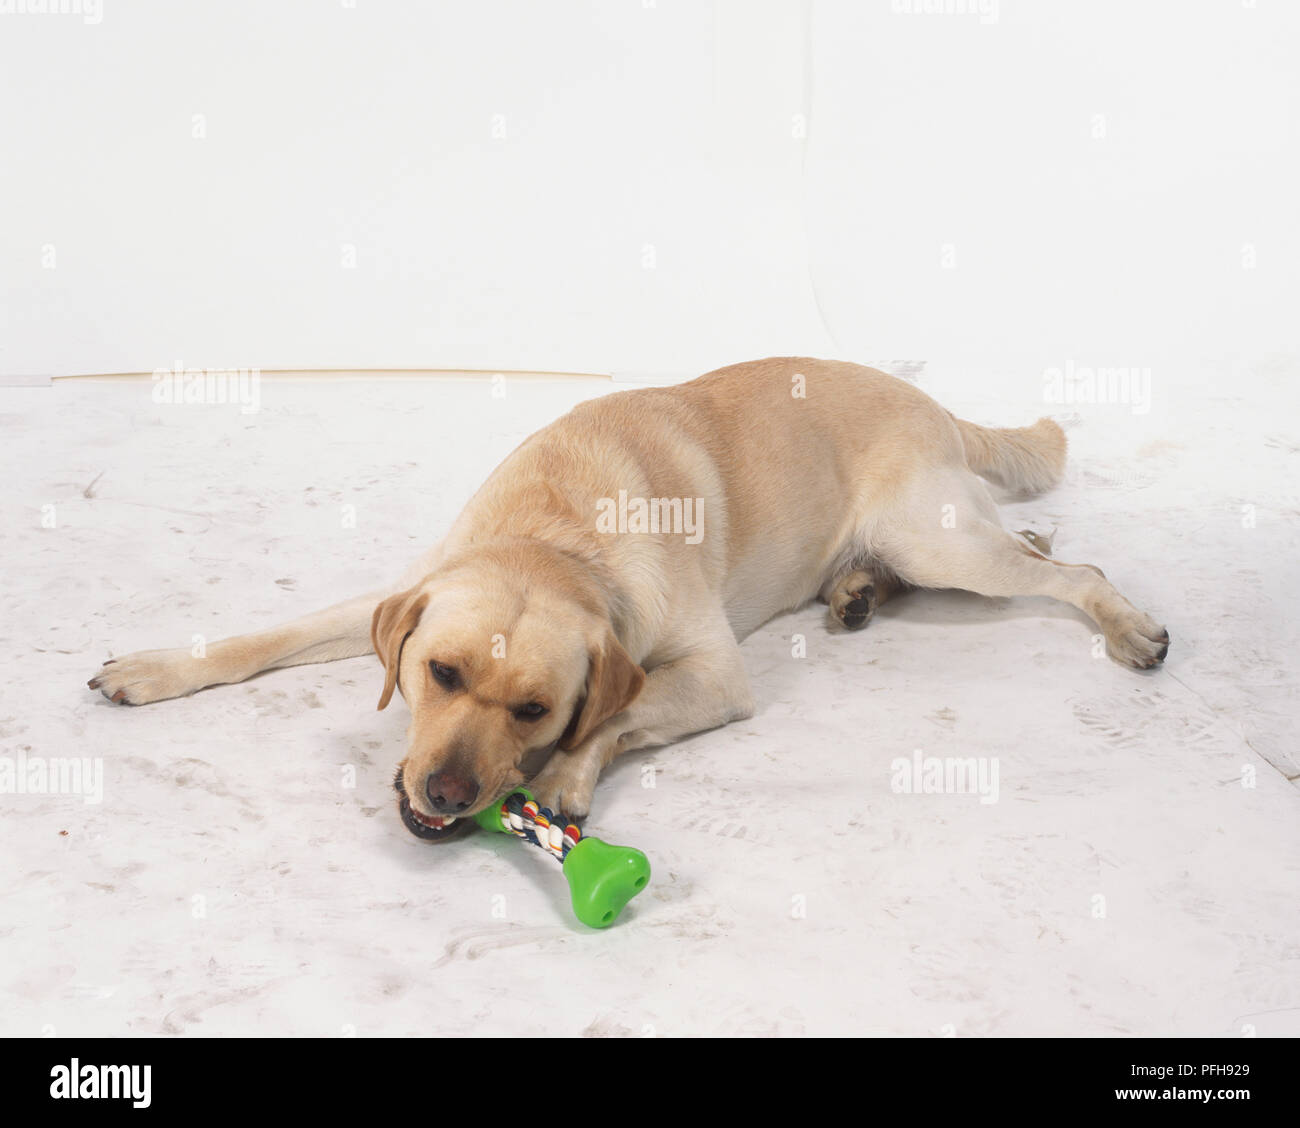 Yellow Labrador Retriever (Canis familairs) lying on the floor and chewing on a dog bone, high angle view Stock Photo